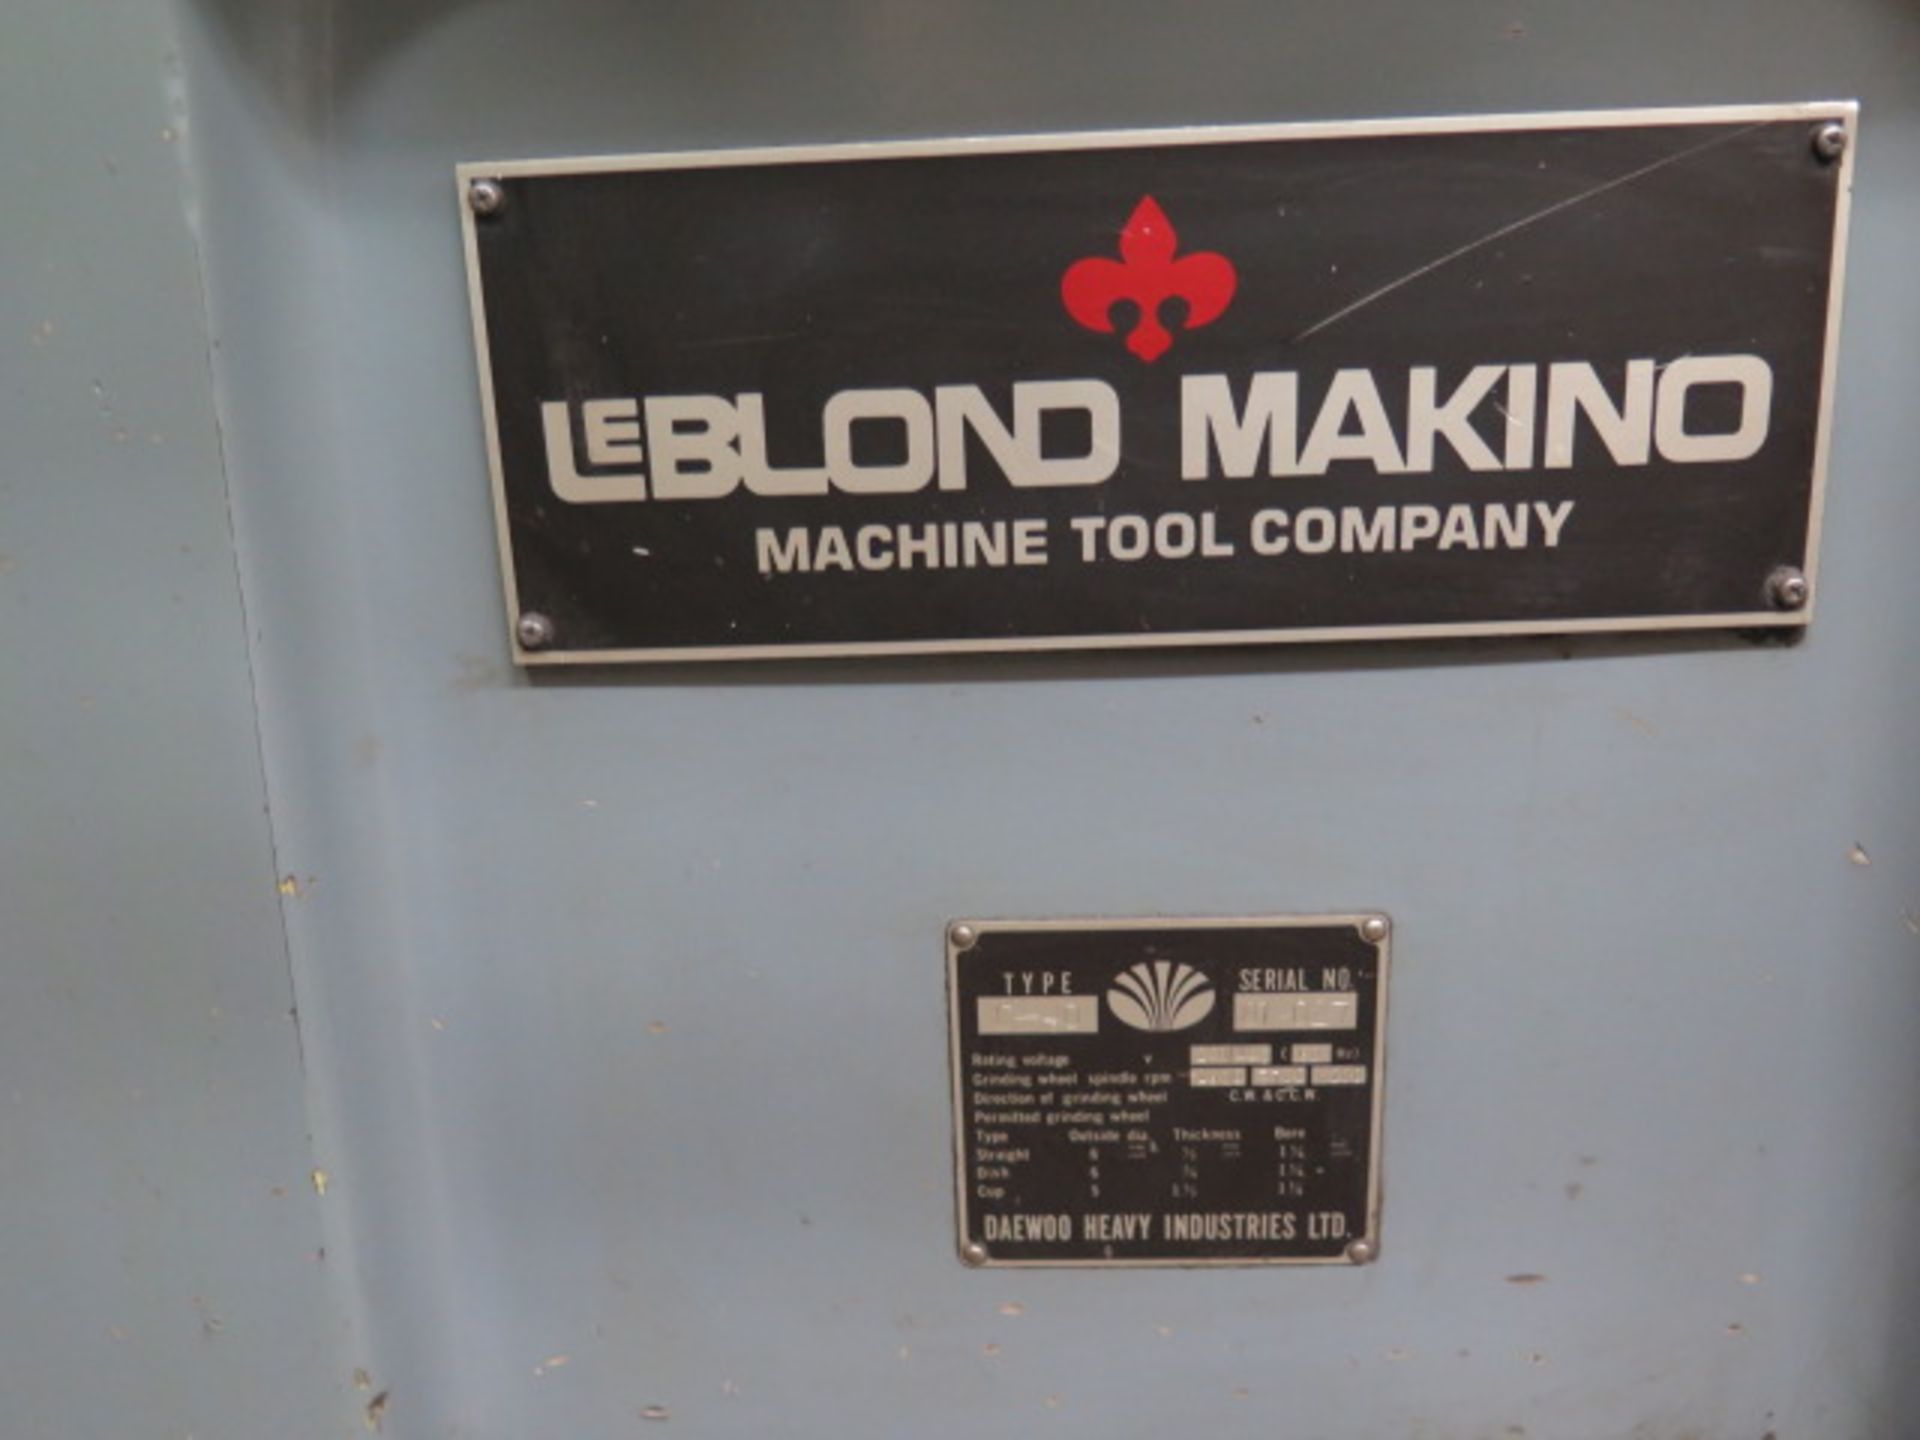 LeBlond Makino C-40 Universal Tool &Cutter Grinder s/n 81-0027 w/ Compound Grinding Head, SOLD AS IS - Image 12 of 12